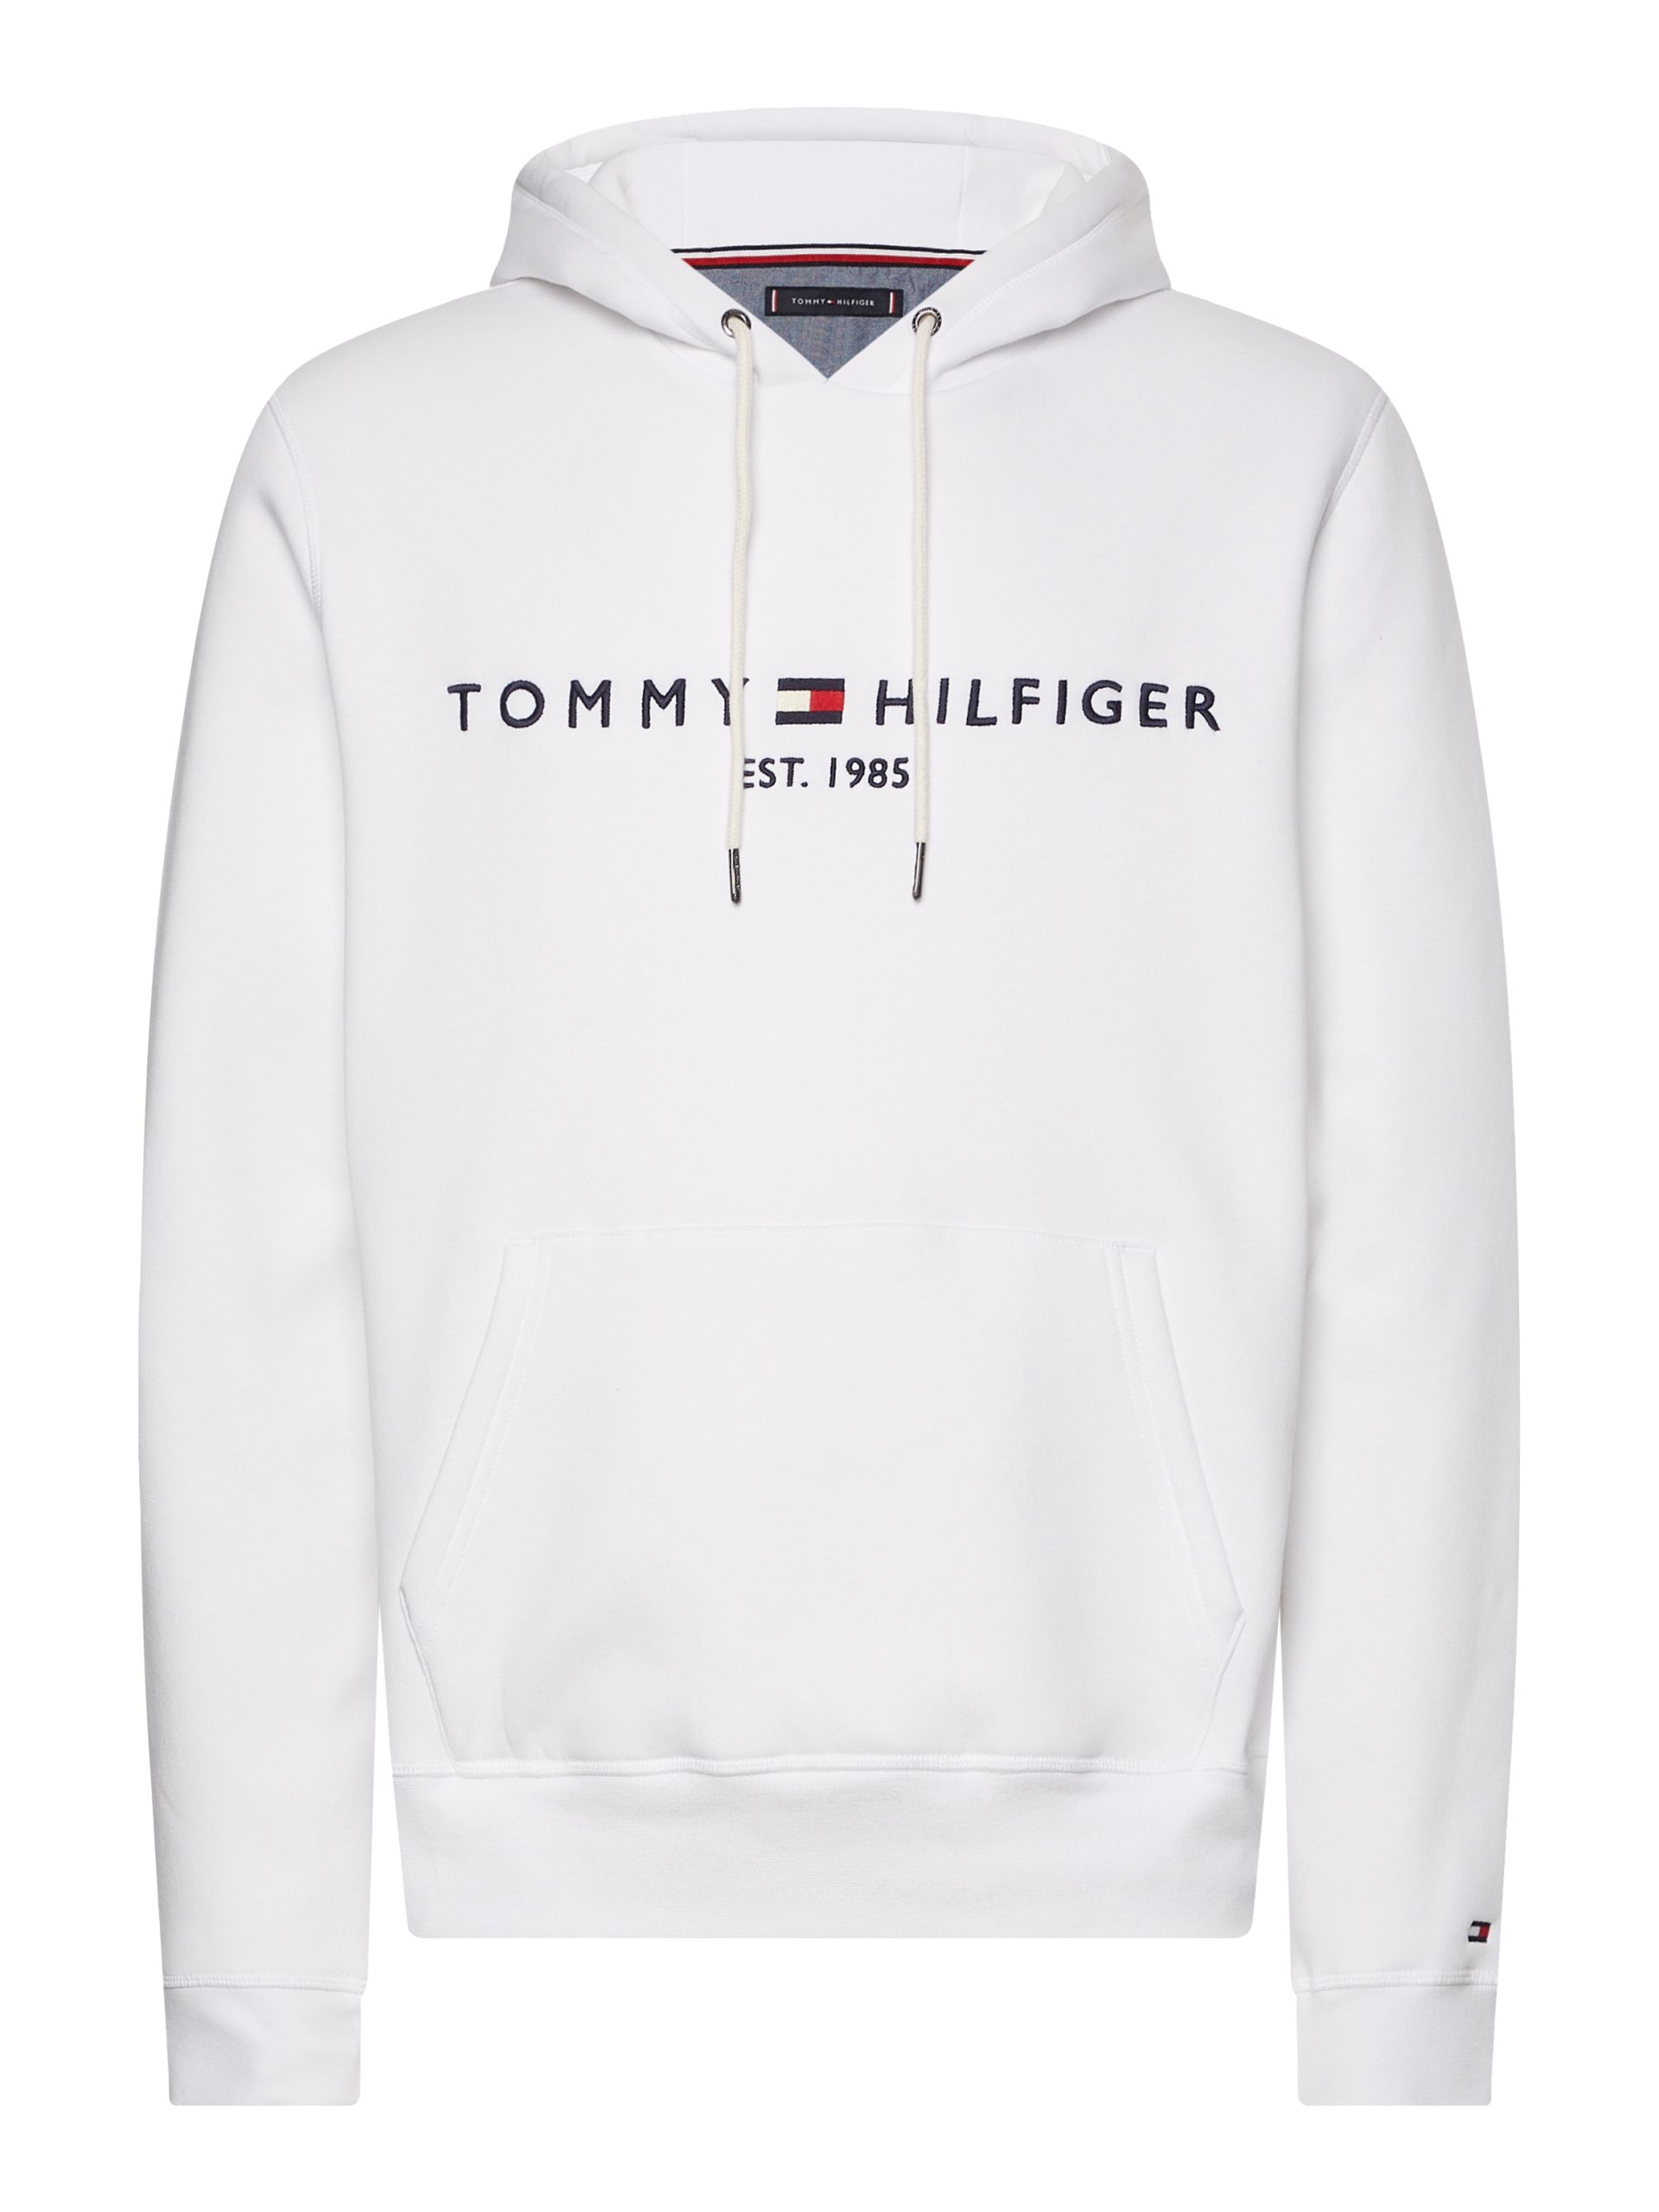 Connolly Man | Wedding Hire | Formal Suits | Debs » Tommy Logo Hoody